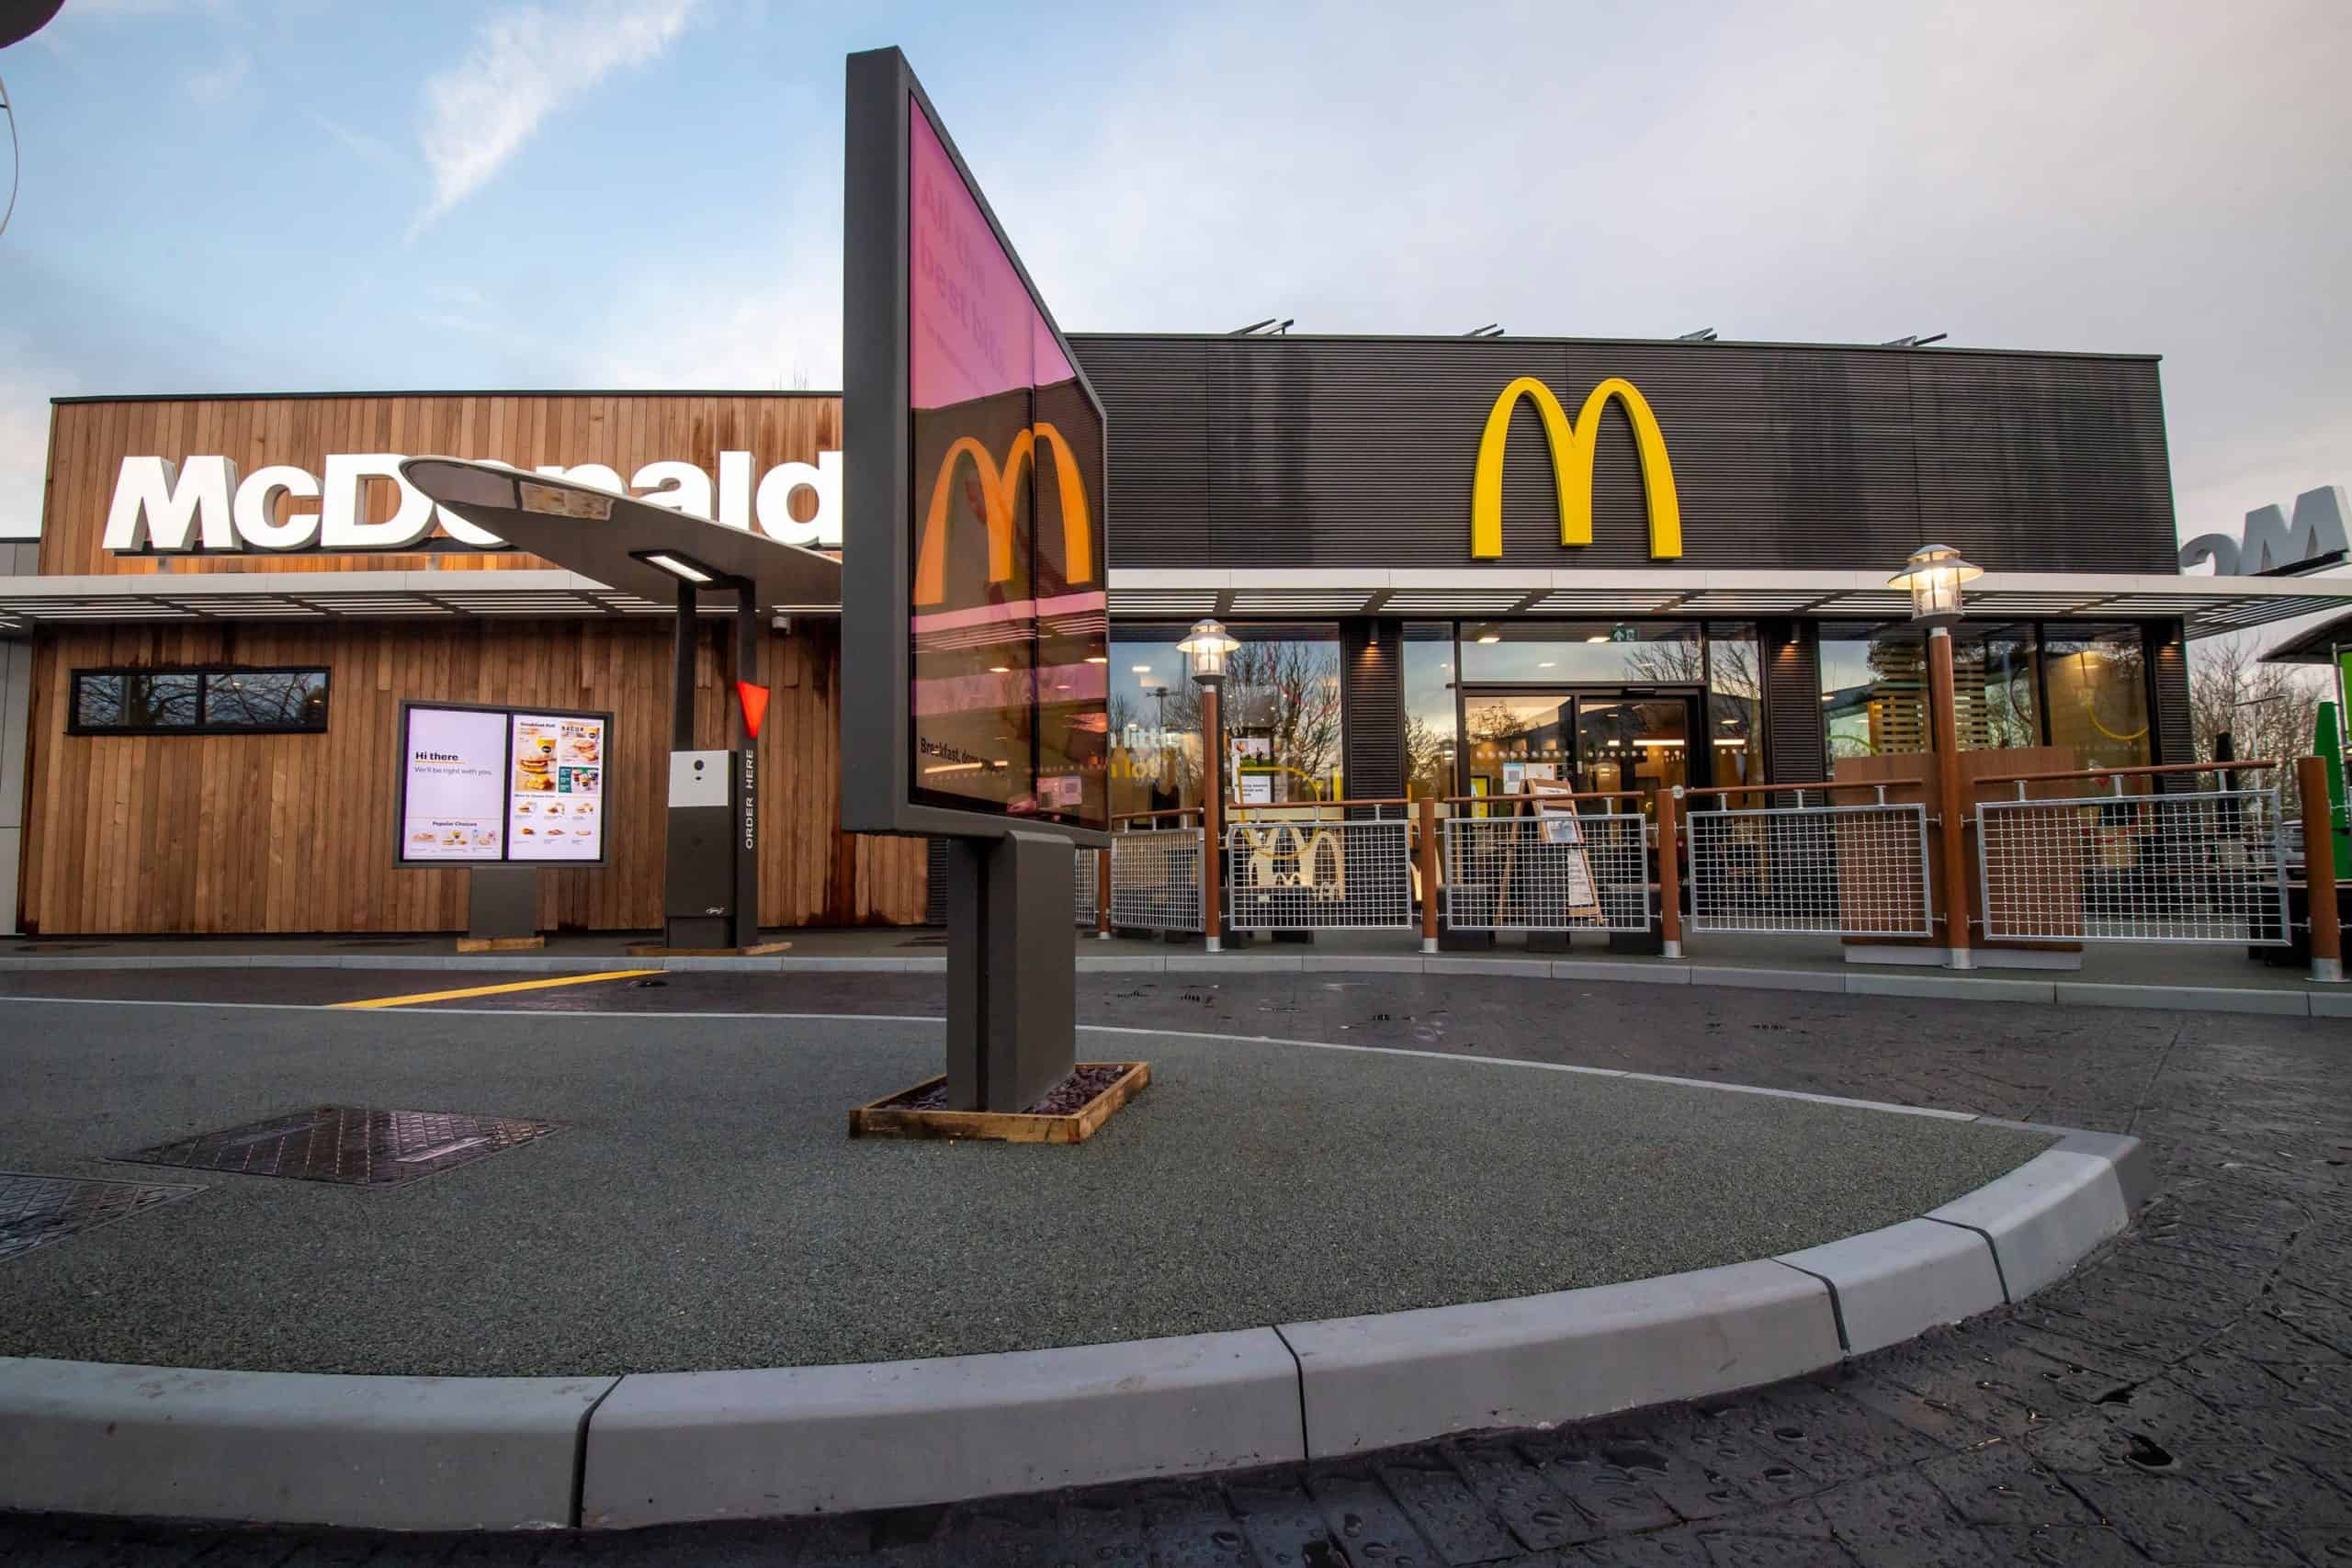 McDonald’s is targeting poor kids living in developing countries, according to new research